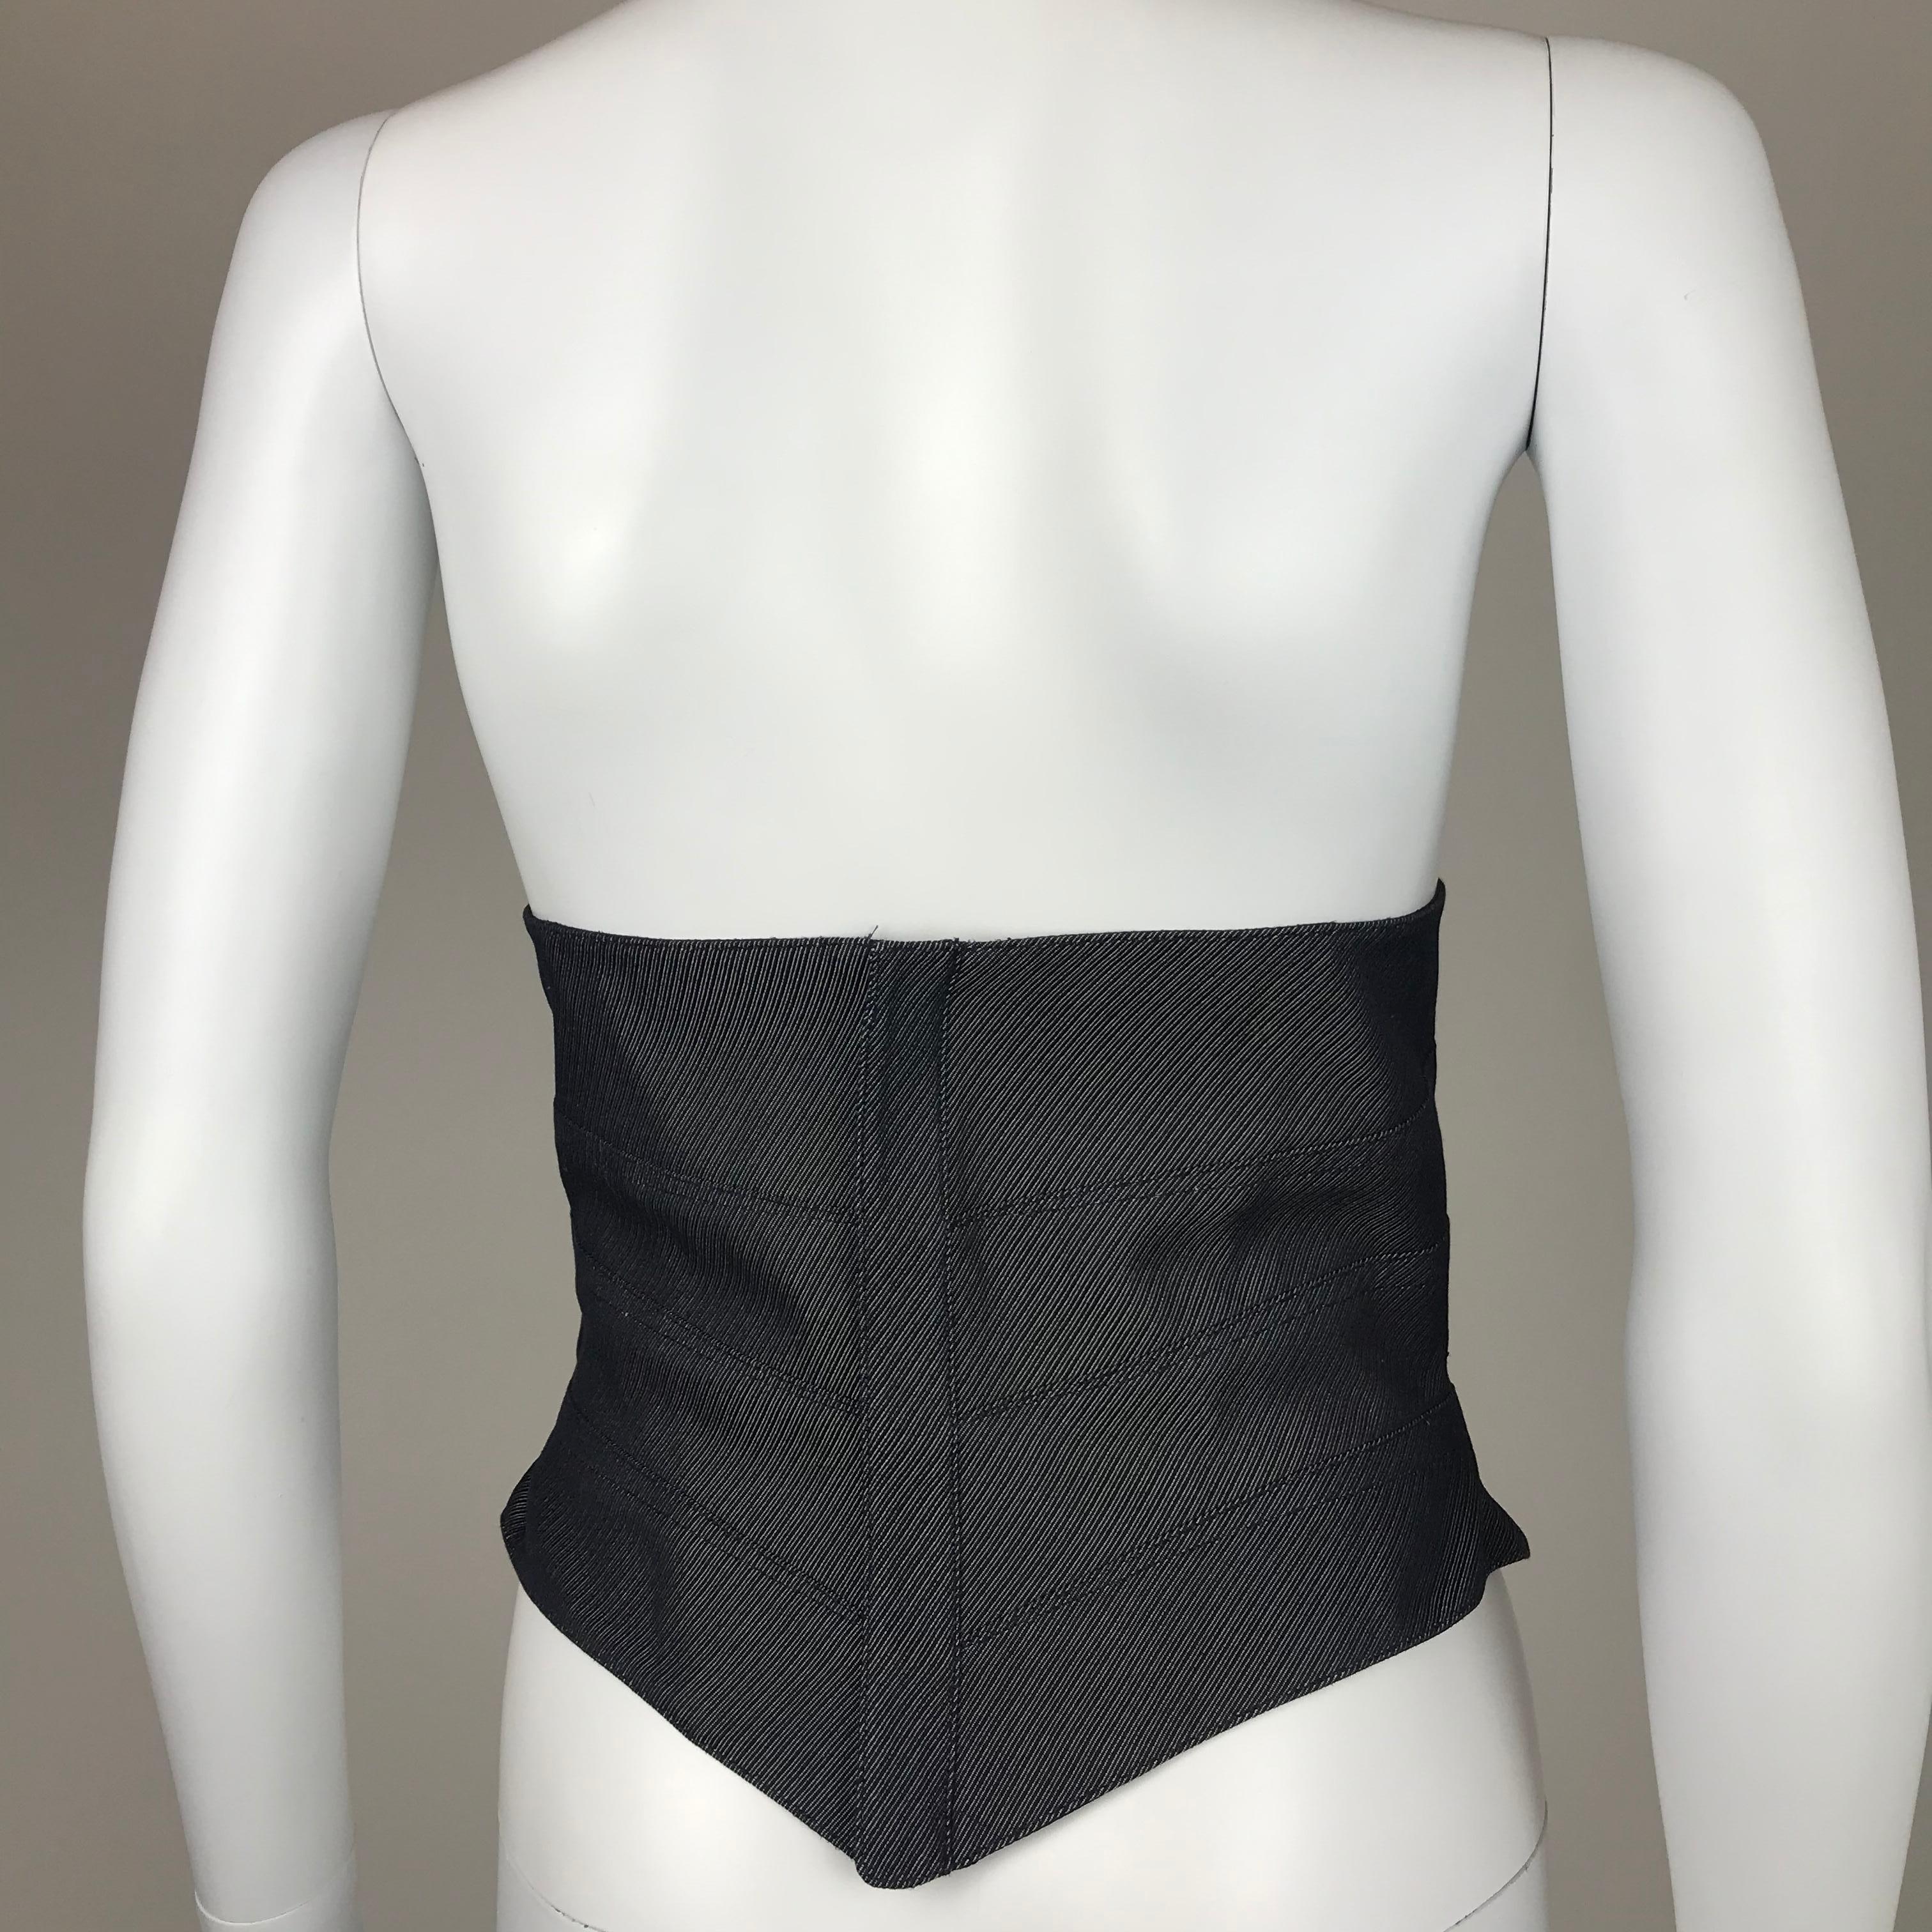 THIERRY MUGLER, Made in France, circa 2000. 
Blue and grey denim effect cotton corset. Dark blue satin lining. 
Closes at the back with a zipper. Fringed lace on the front. 
No size tag but I would recommend it for EU38/40 or Medium.
Please see